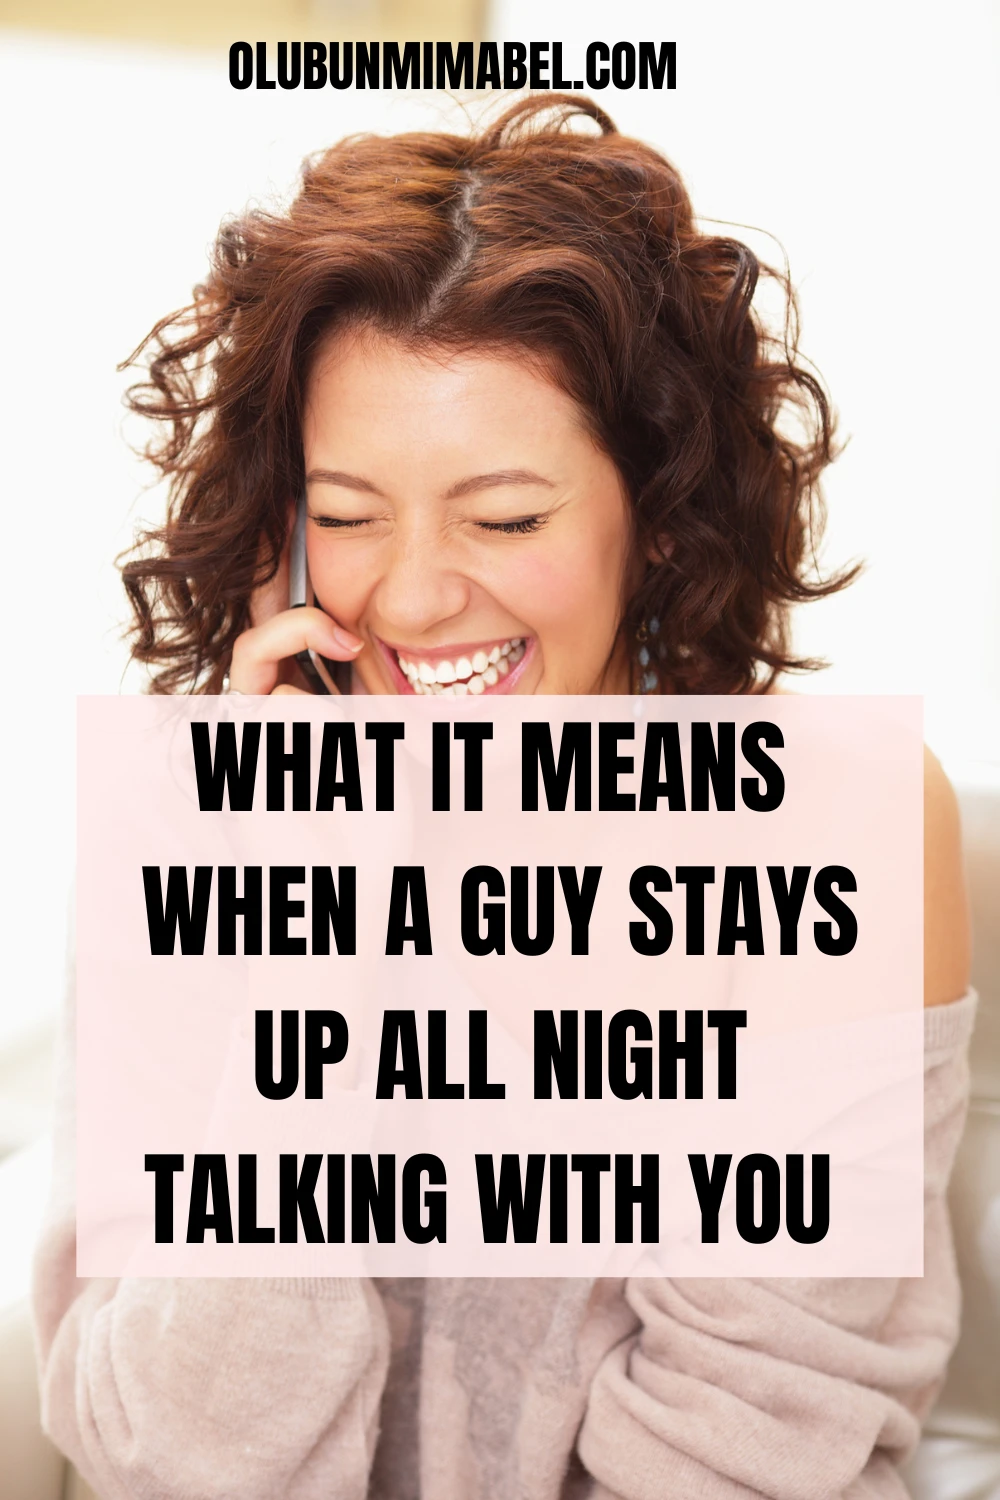 If A Guy Stays Up All Night Talking To You